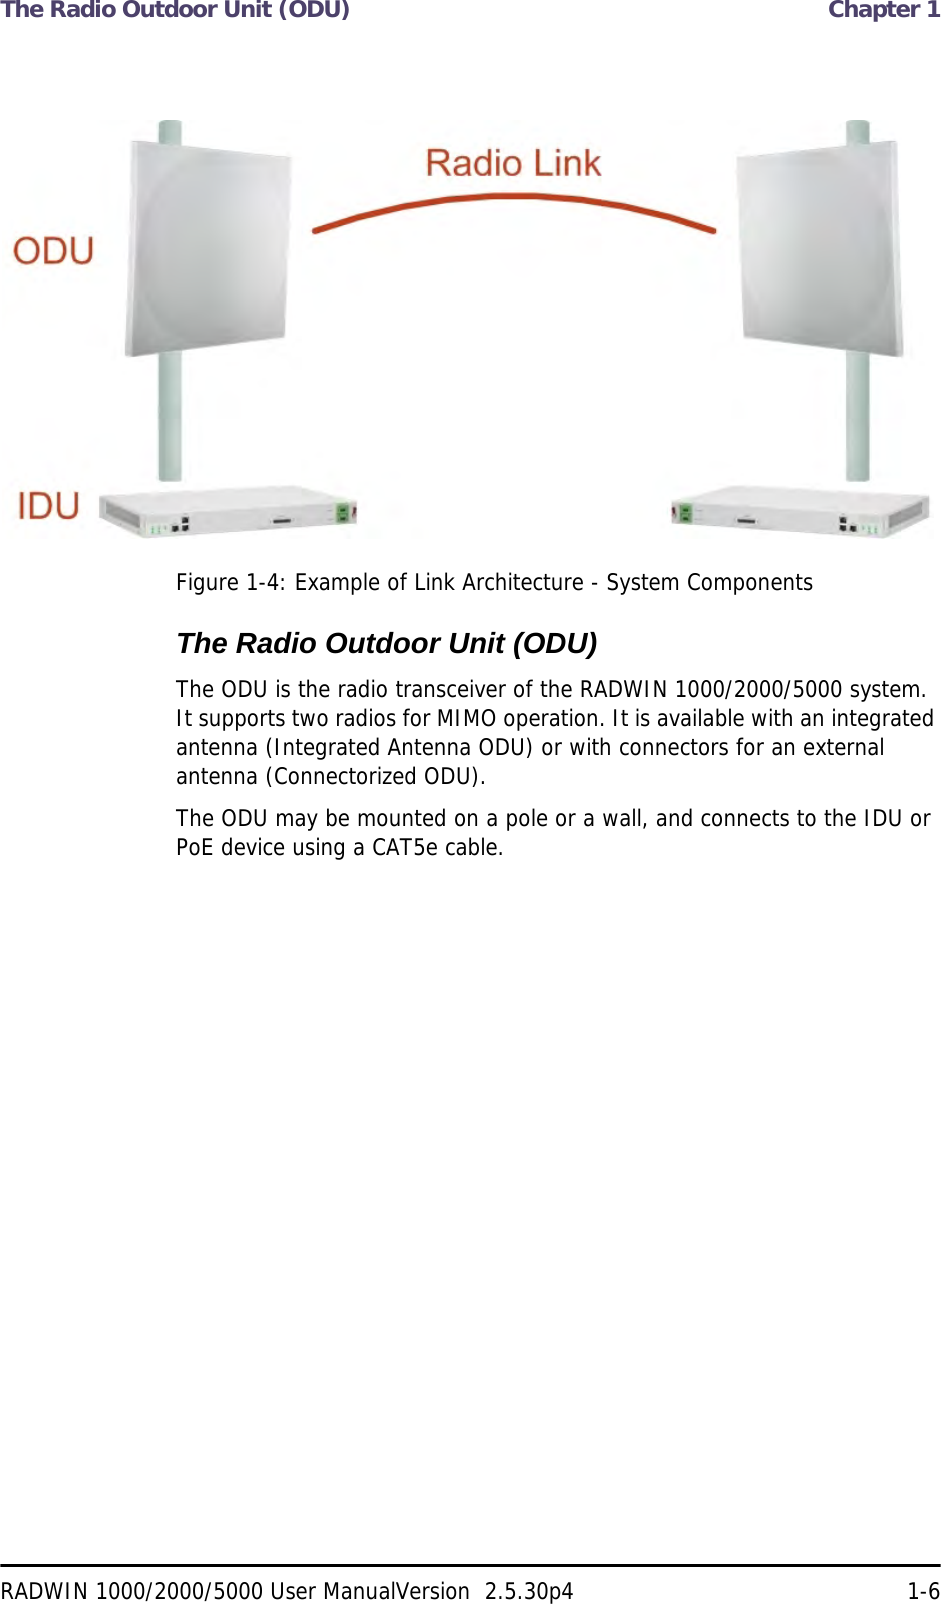 The Radio Outdoor Unit (ODU)  Chapter 1RADWIN 1000/2000/5000 User ManualVersion  2.5.30p4 1-6Figure 1-4: Example of Link Architecture - System ComponentsThe Radio Outdoor Unit (ODU)The ODU is the radio transceiver of the RADWIN 1000/2000/5000 system. It supports two radios for MIMO operation. It is available with an integrated antenna (Integrated Antenna ODU) or with connectors for an external antenna (Connectorized ODU).The ODU may be mounted on a pole or a wall, and connects to the IDU or PoE device using a CAT5e cable.